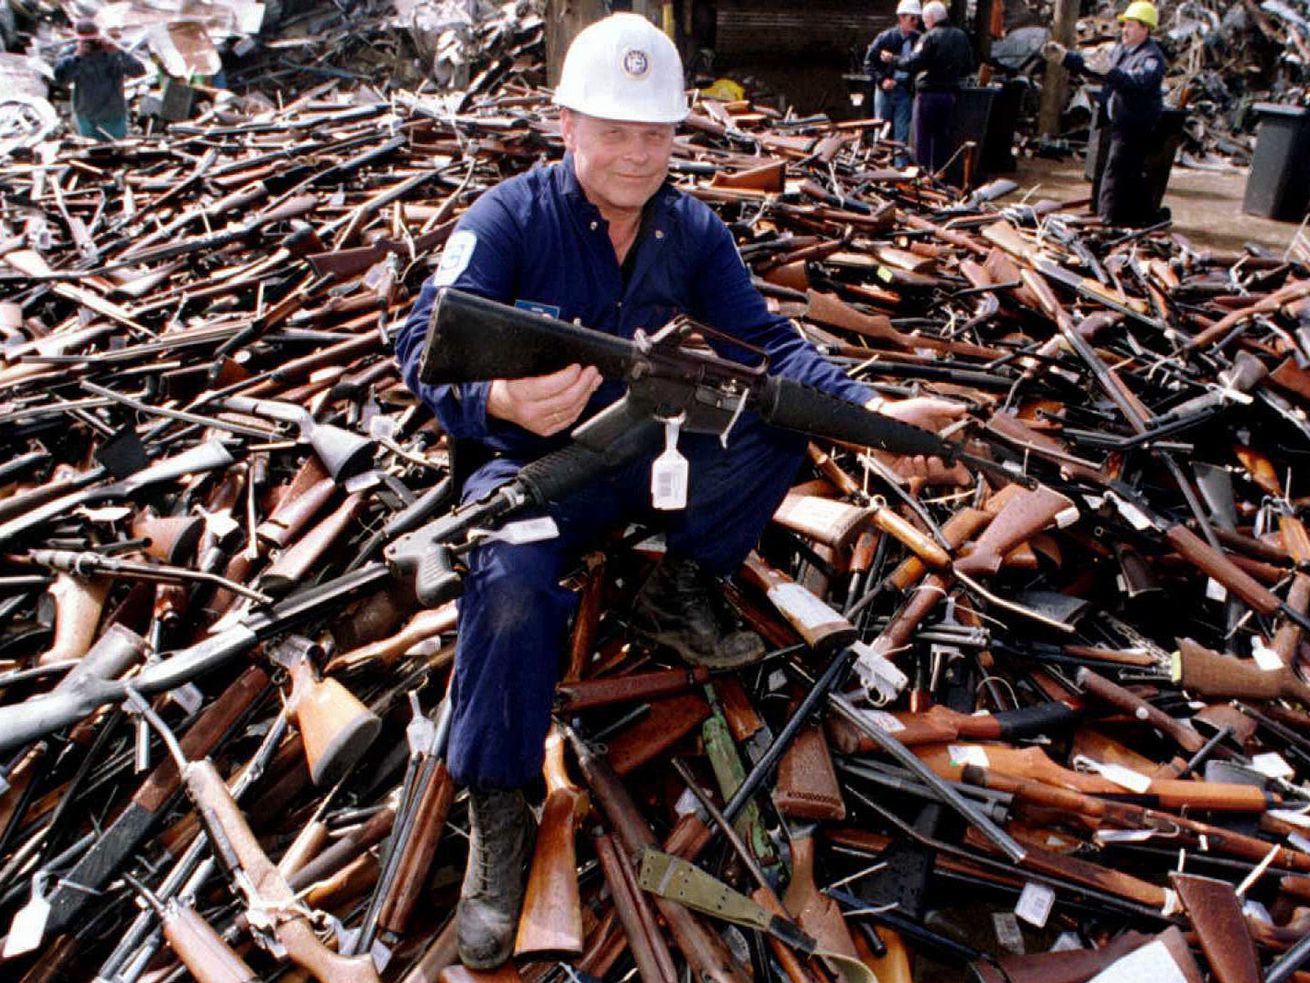 Australia confiscated 650,000 guns. Murders and suicides plummeted.